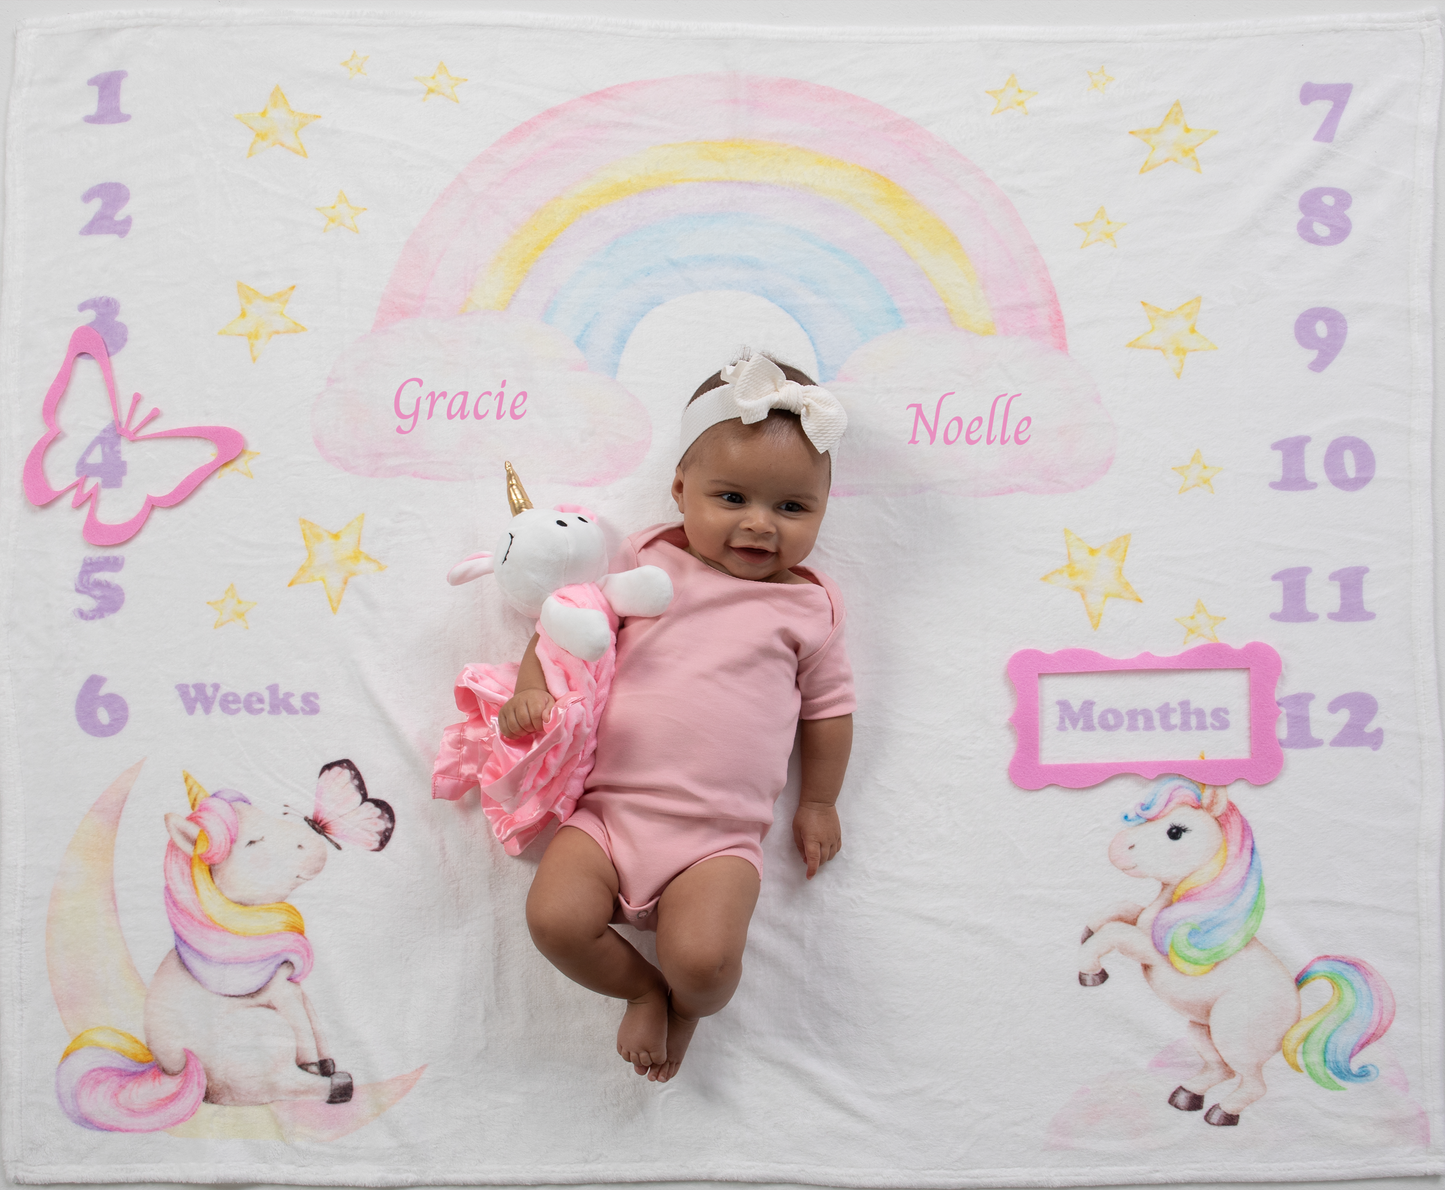  Capture your baby's growth and development with our soft and cozy magical unicorn and rainbow milestone blanket. It's perfect for monthly photos to track your little one's growth and create cherished keepsakes.